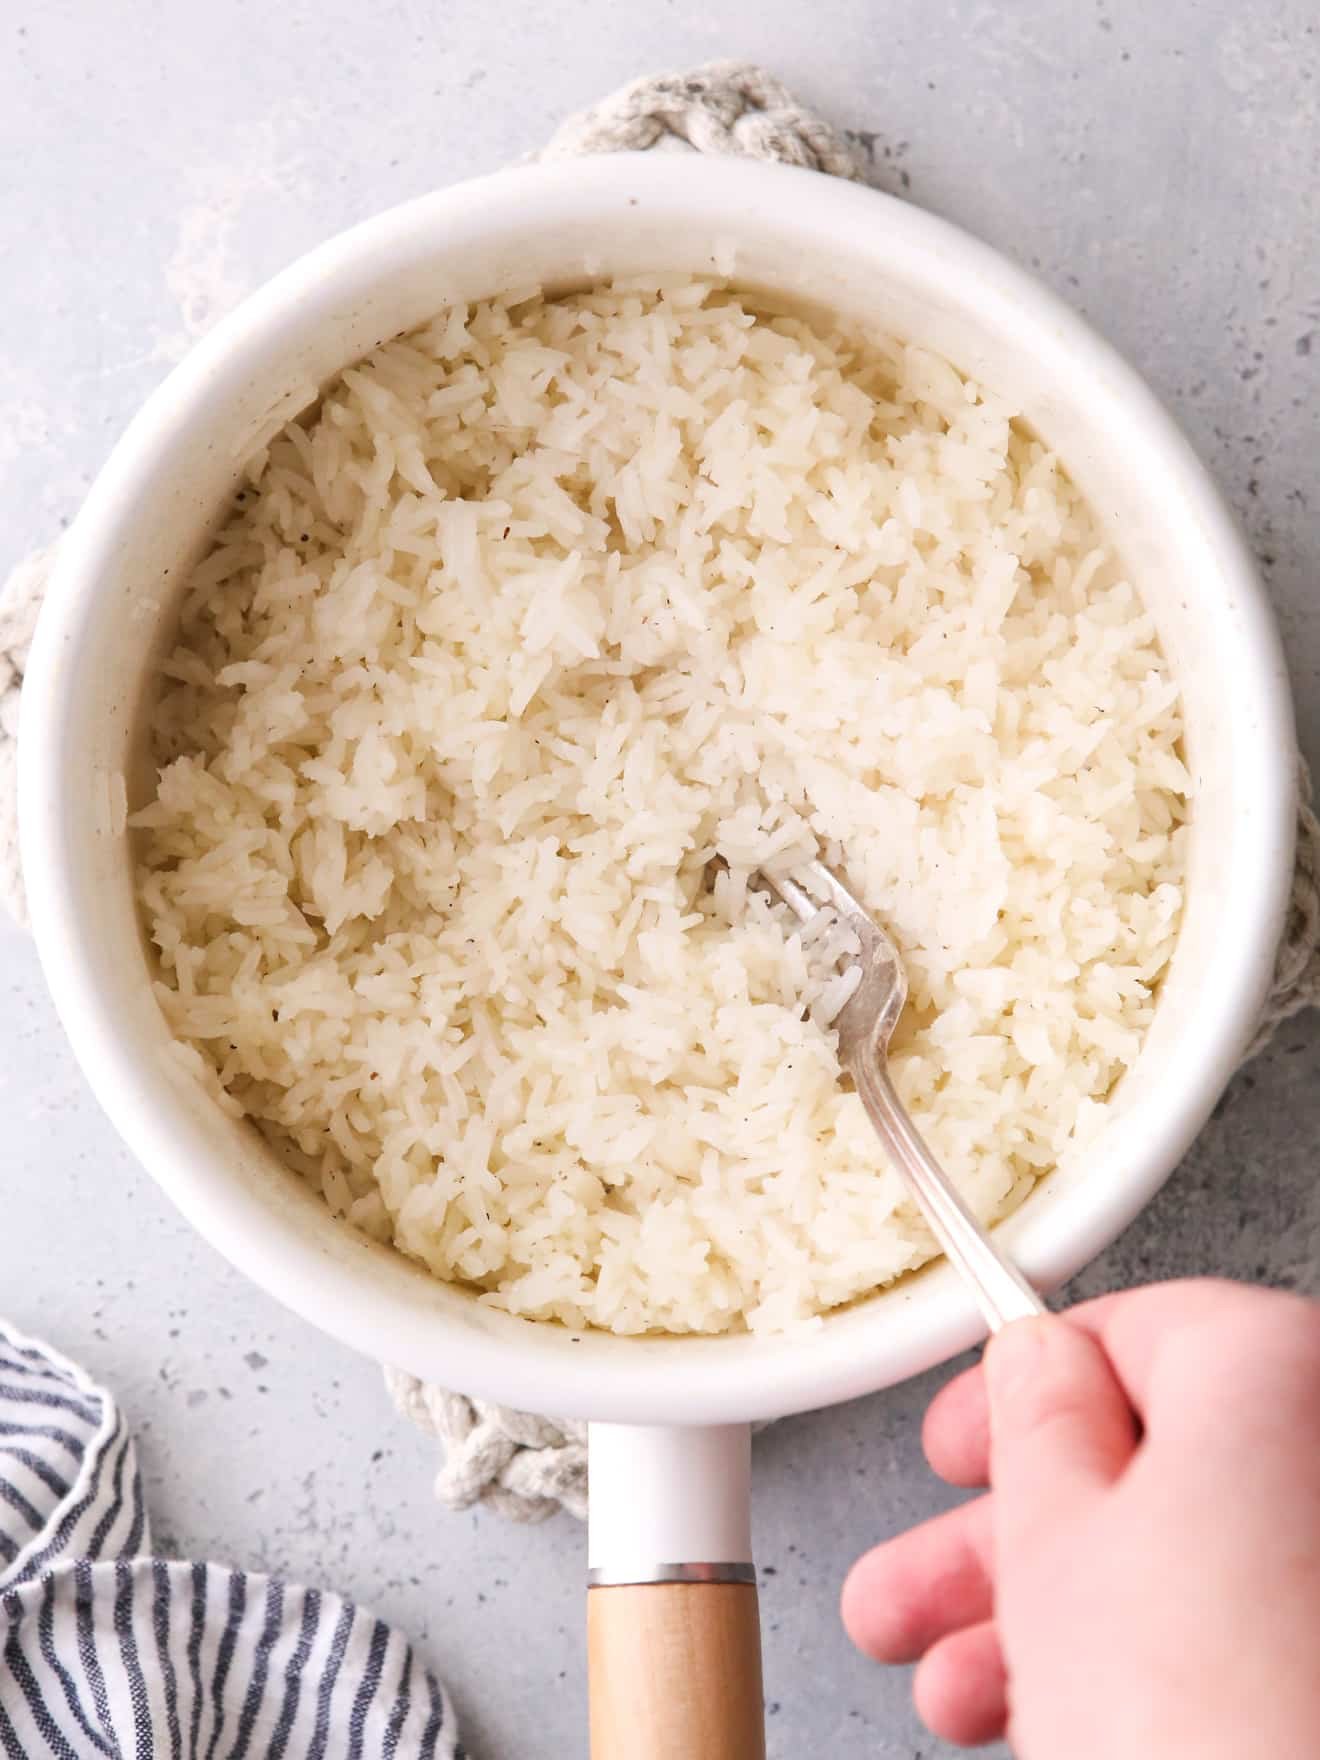 https://www.completelydelicious.com/wp-content/uploads/2021/01/perfect-steamed-rice-6.jpg